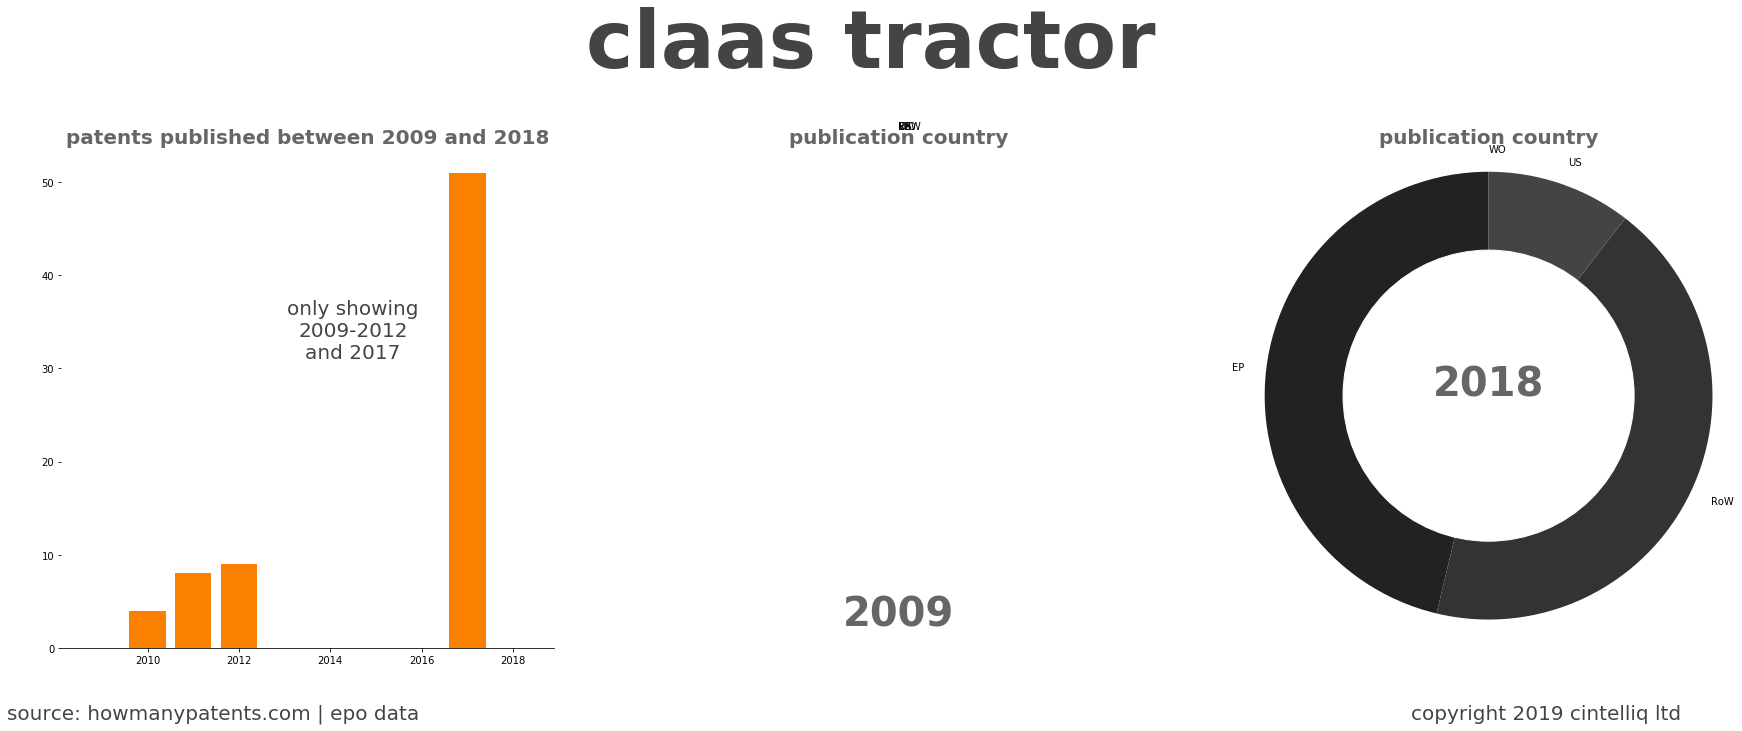 summary of patents for Claas Tractor